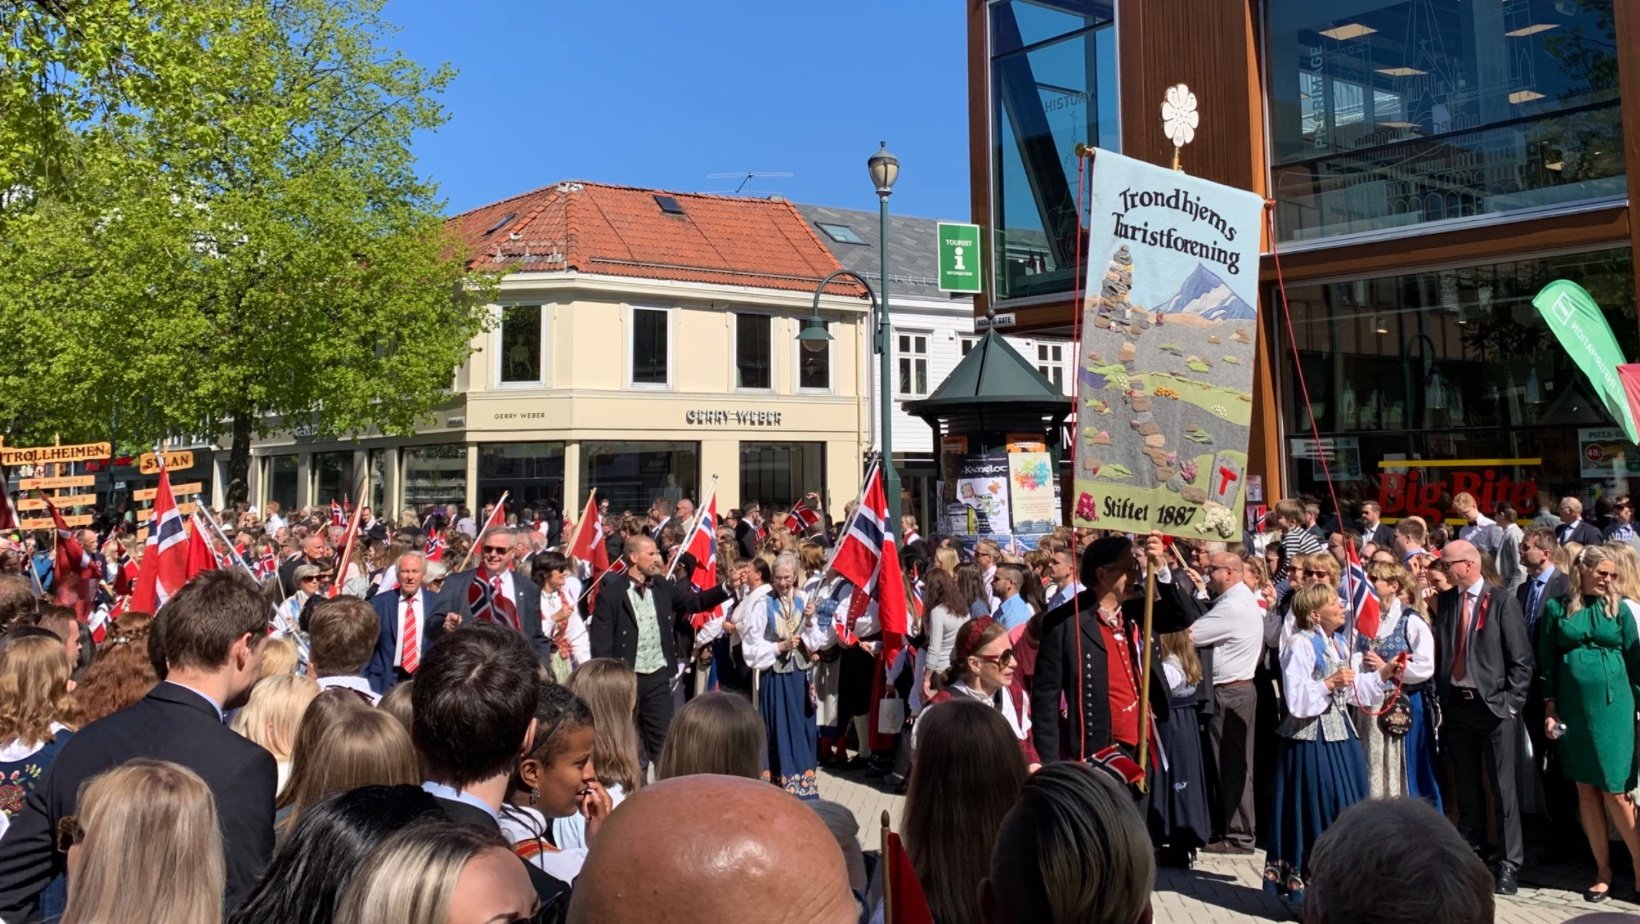 Crowd in Norway on 17 May, Norwegian Constitution Day. Photo: David Nikel.